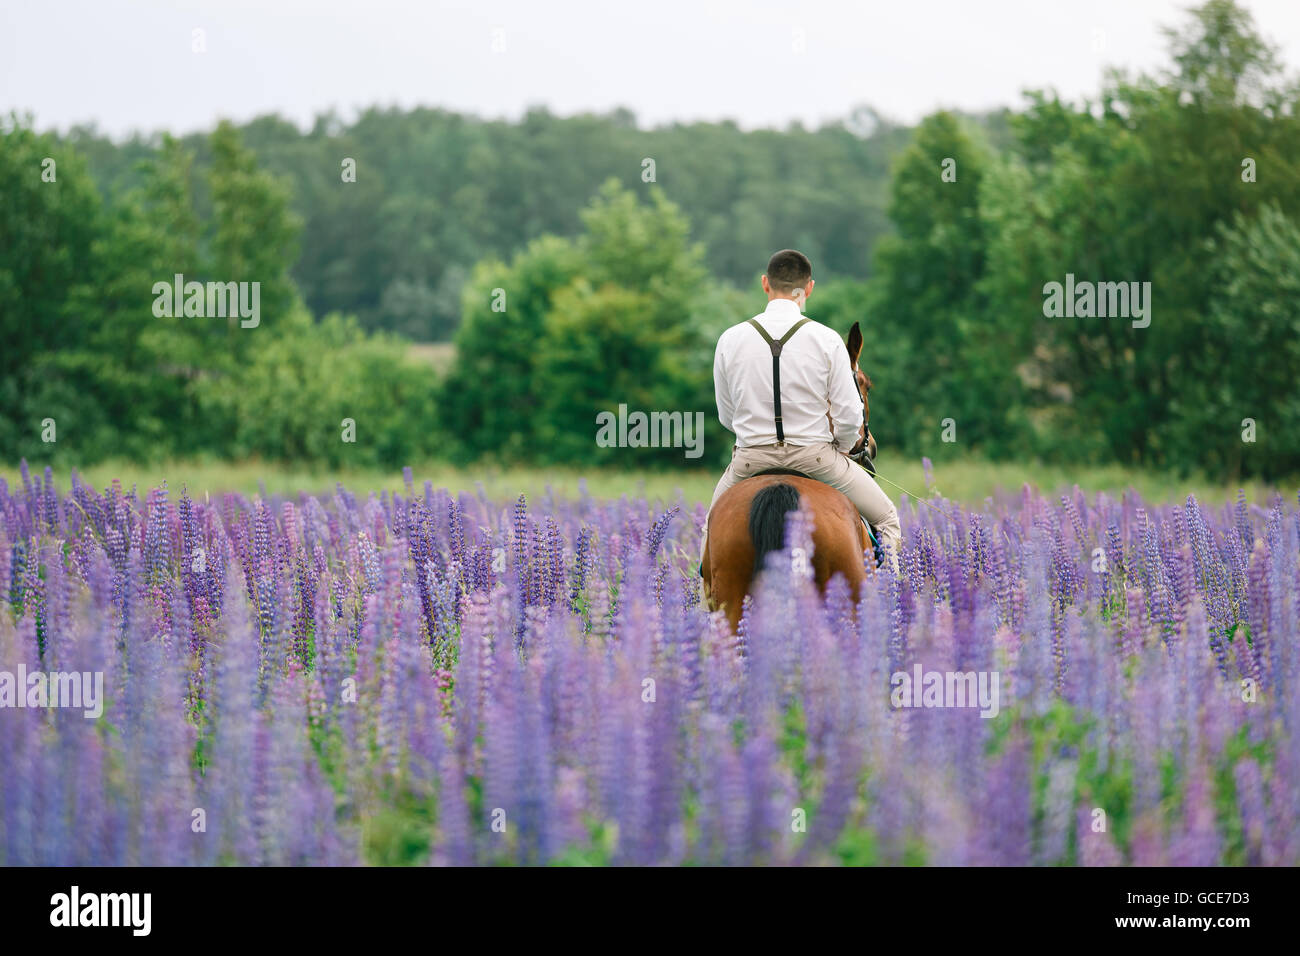 The groom riding on horseback across a field of lupine Stock Photo